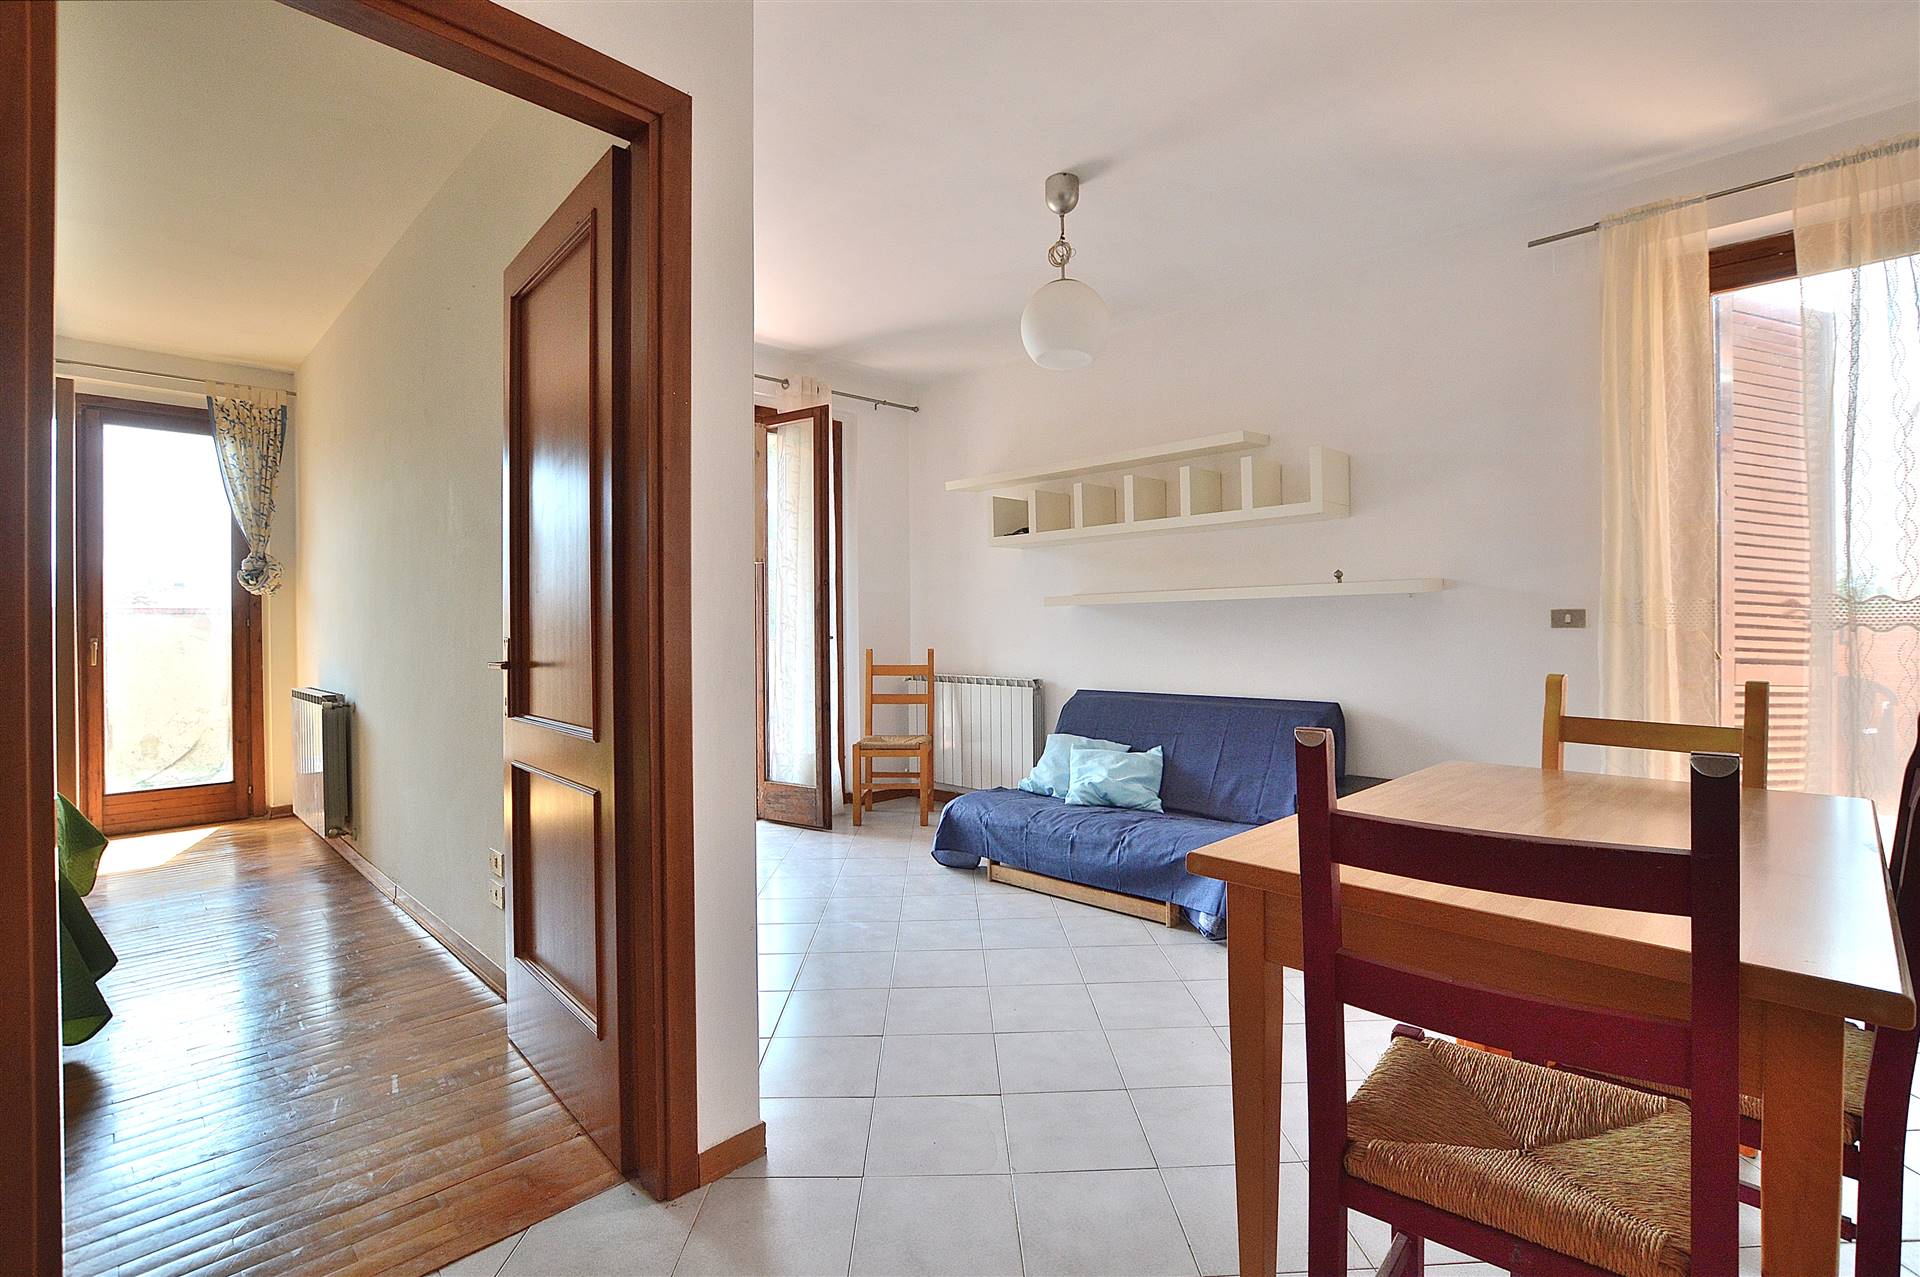 MORE DI CUNA, MONTERONI D'ARBIA, Apartment for sale of 46 Sq. mt., Excellent Condition, Heating Individual heating system, Energetic class: E, Epi: 81,2 kwh/m2 year, placed at 2° on 2, composed by: 2 